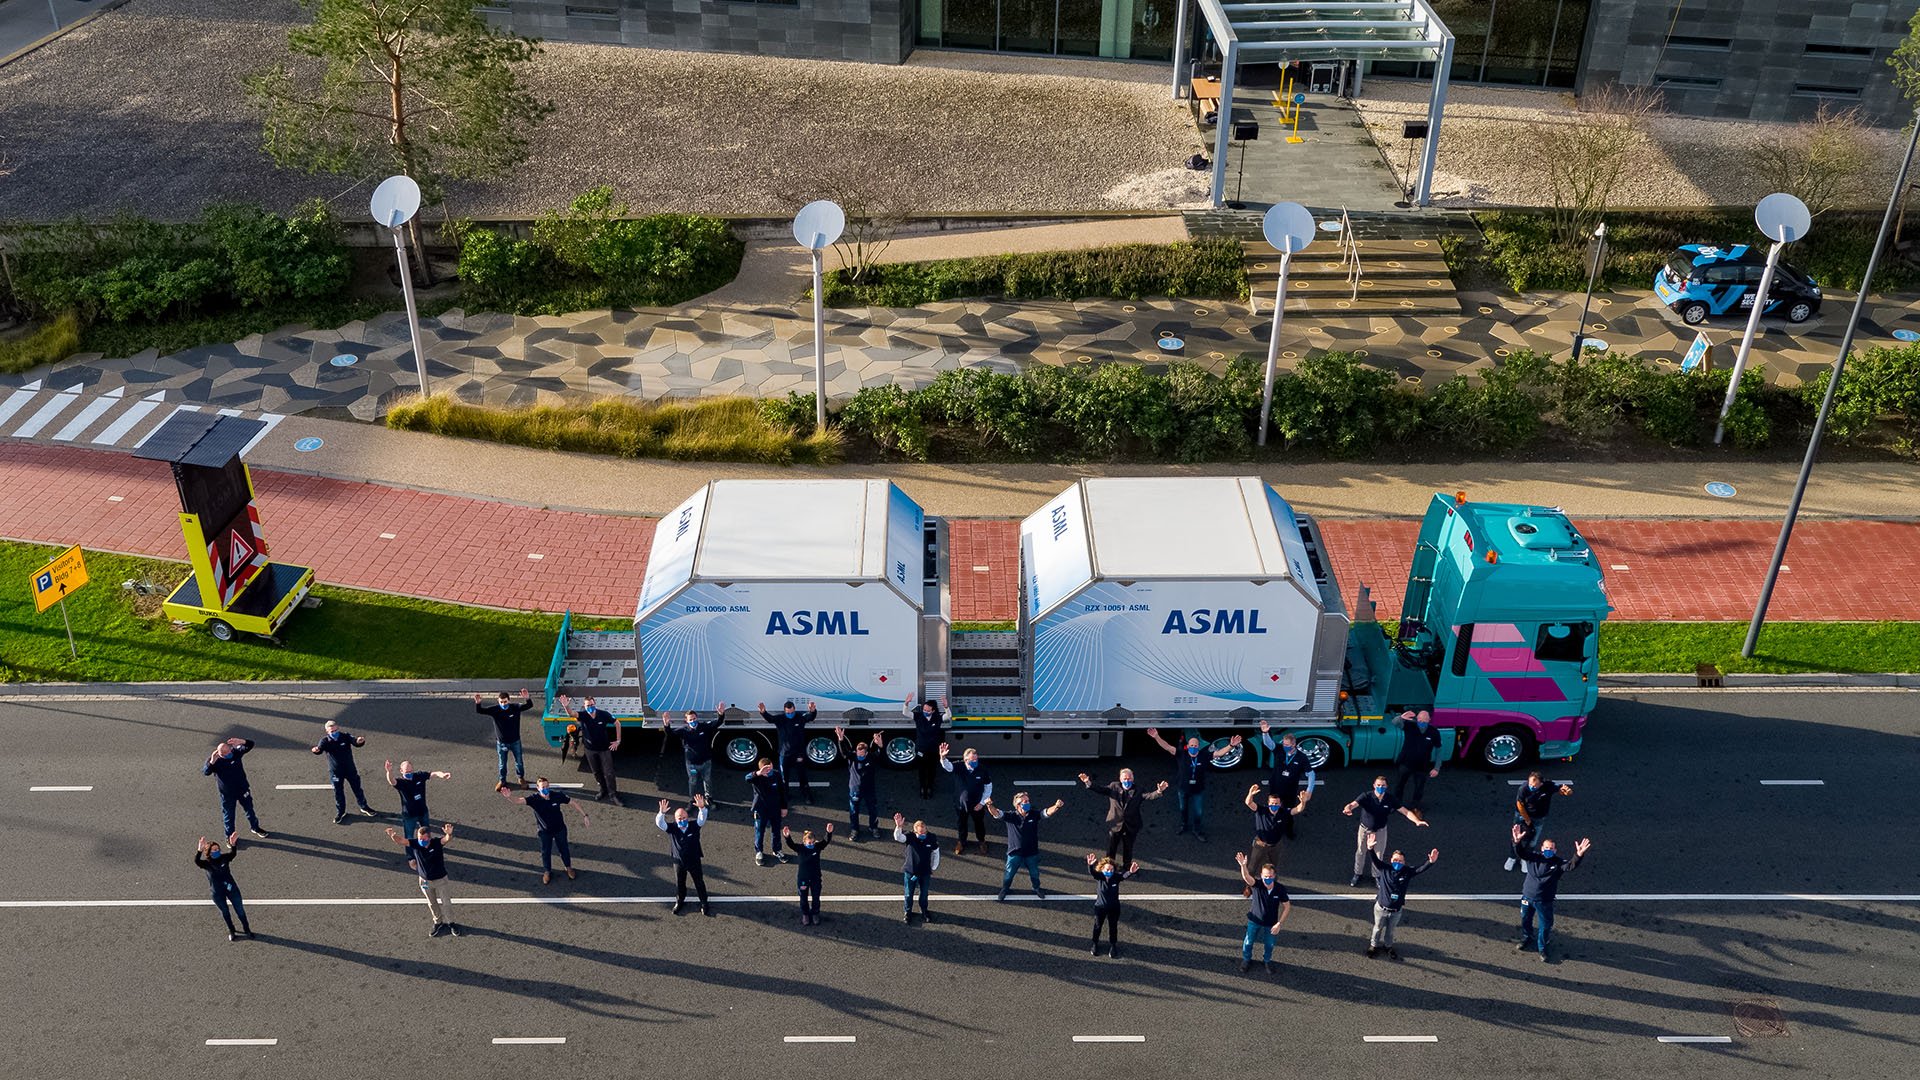 Employees stand with arms raised in front of truck containing the 100th ASML EUV machine